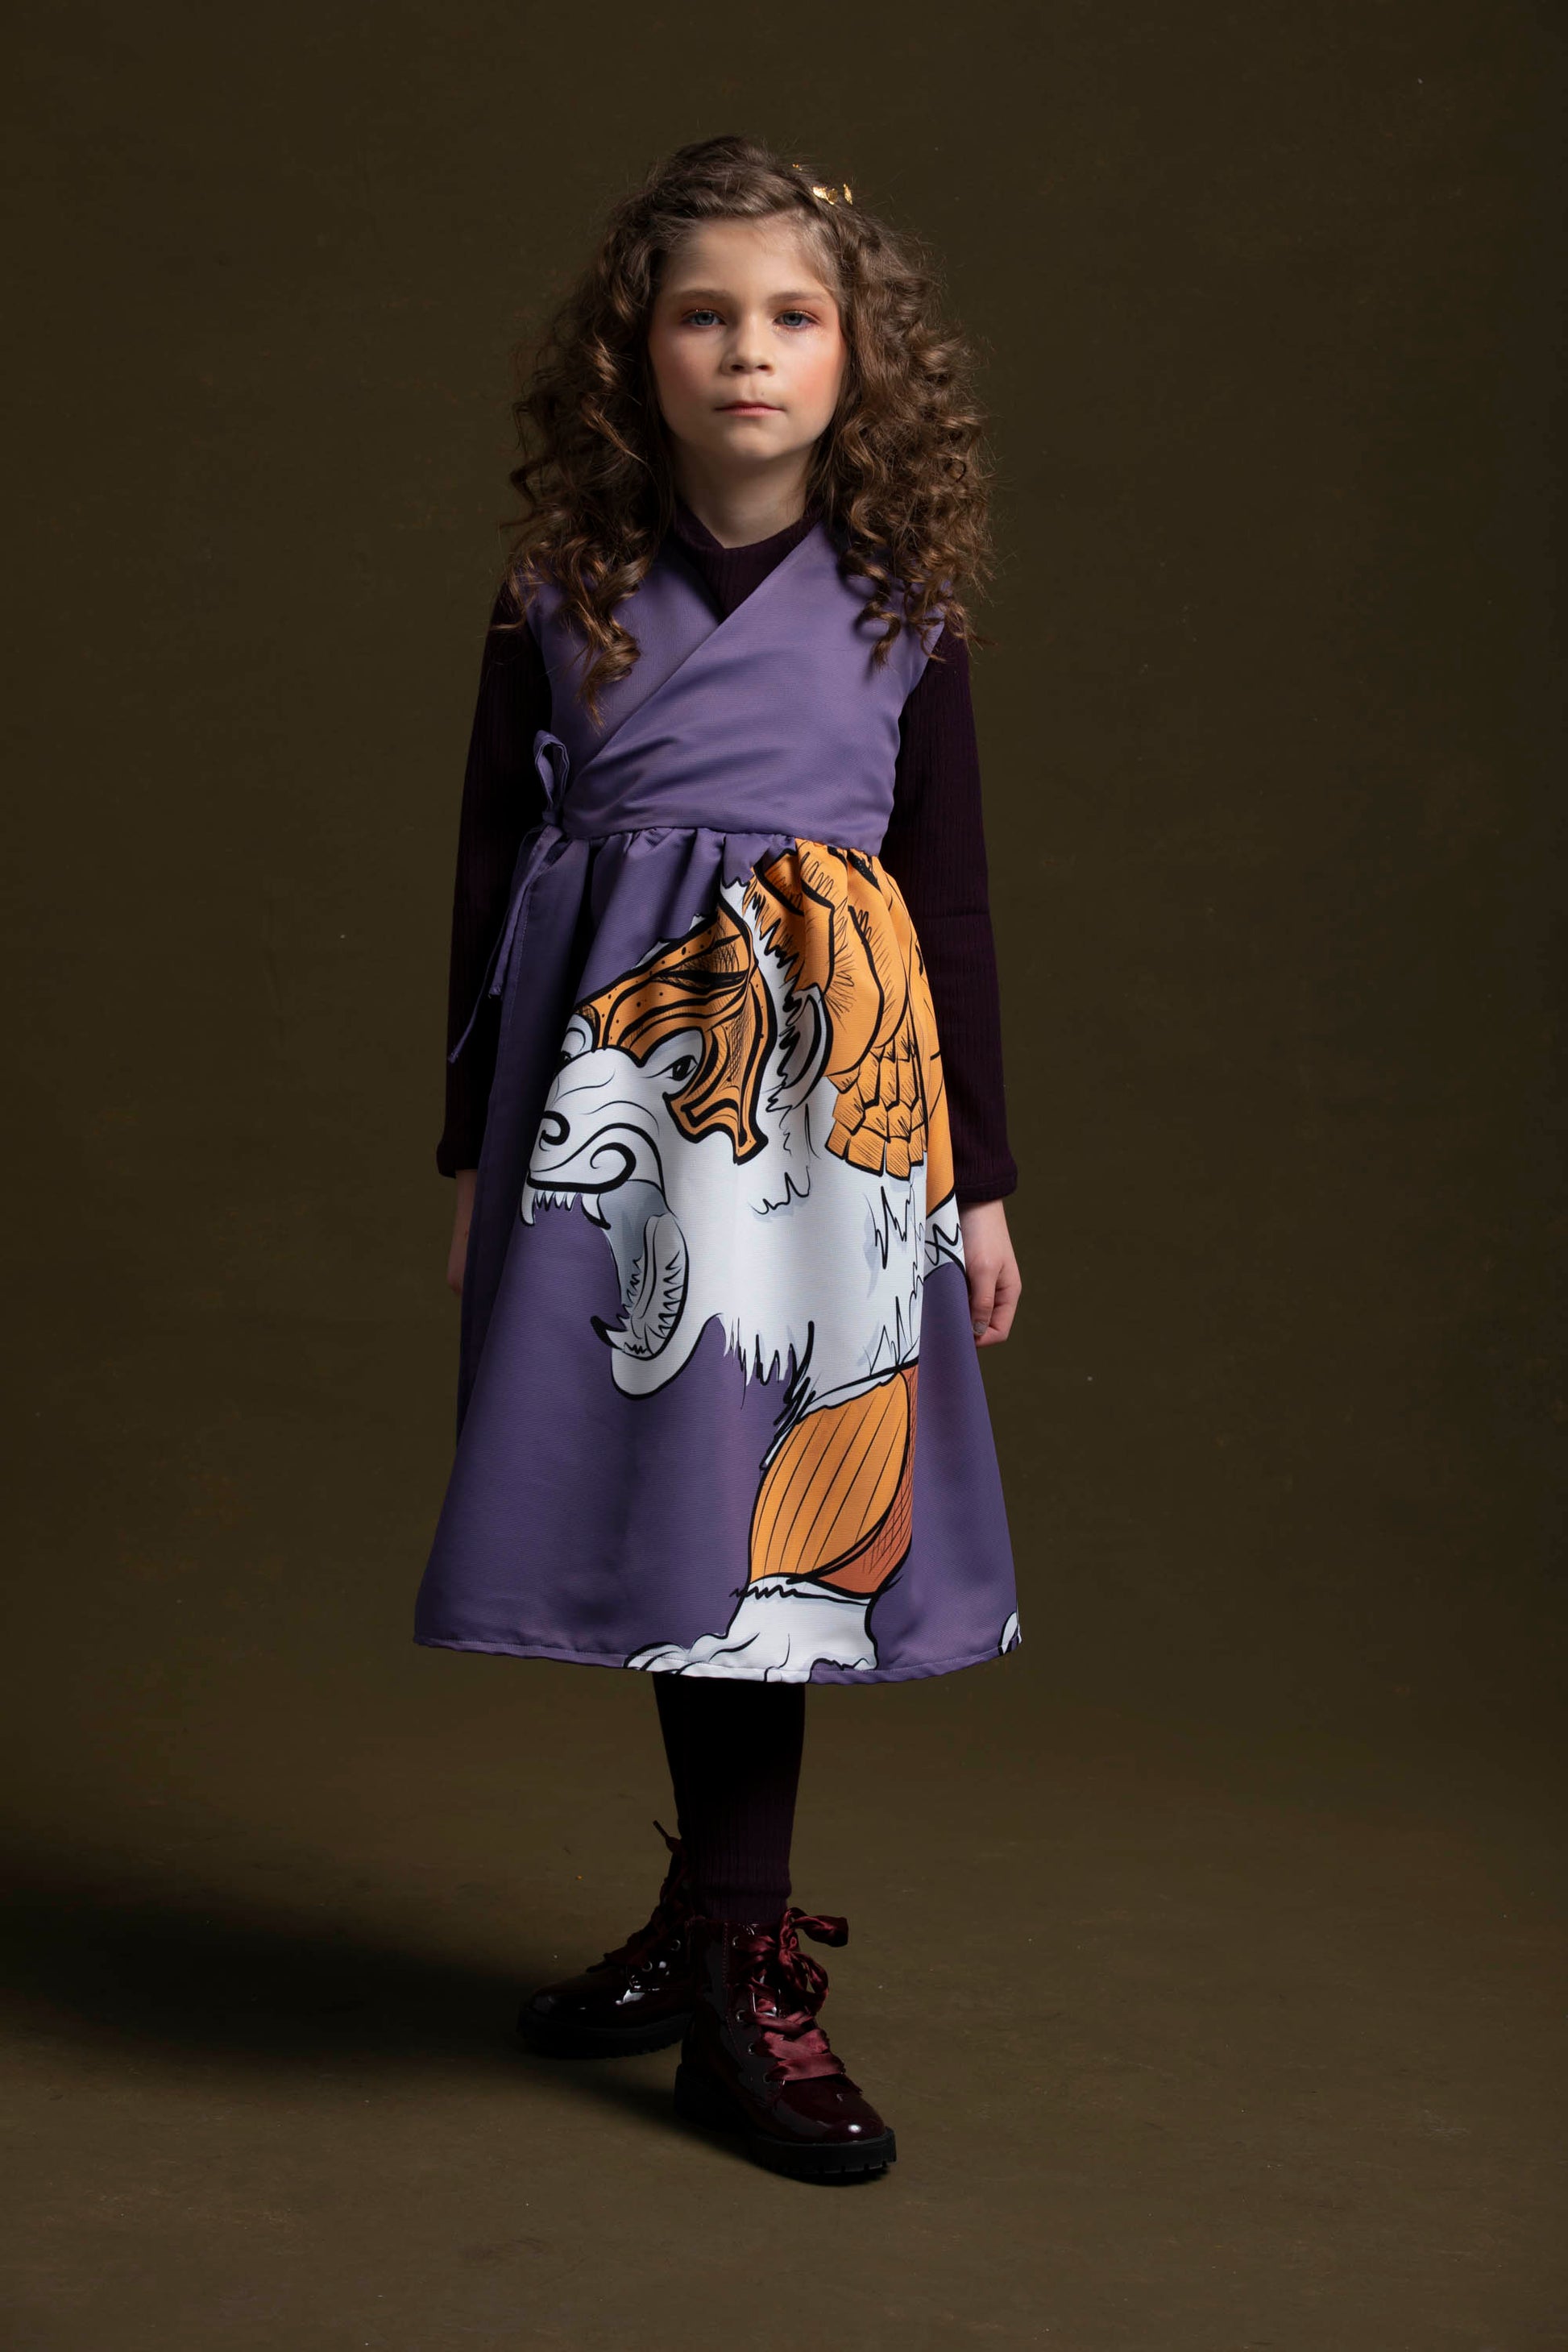 This young lady angelic poses in her lorek dress coordinated with purple rib knit leggings and tunic